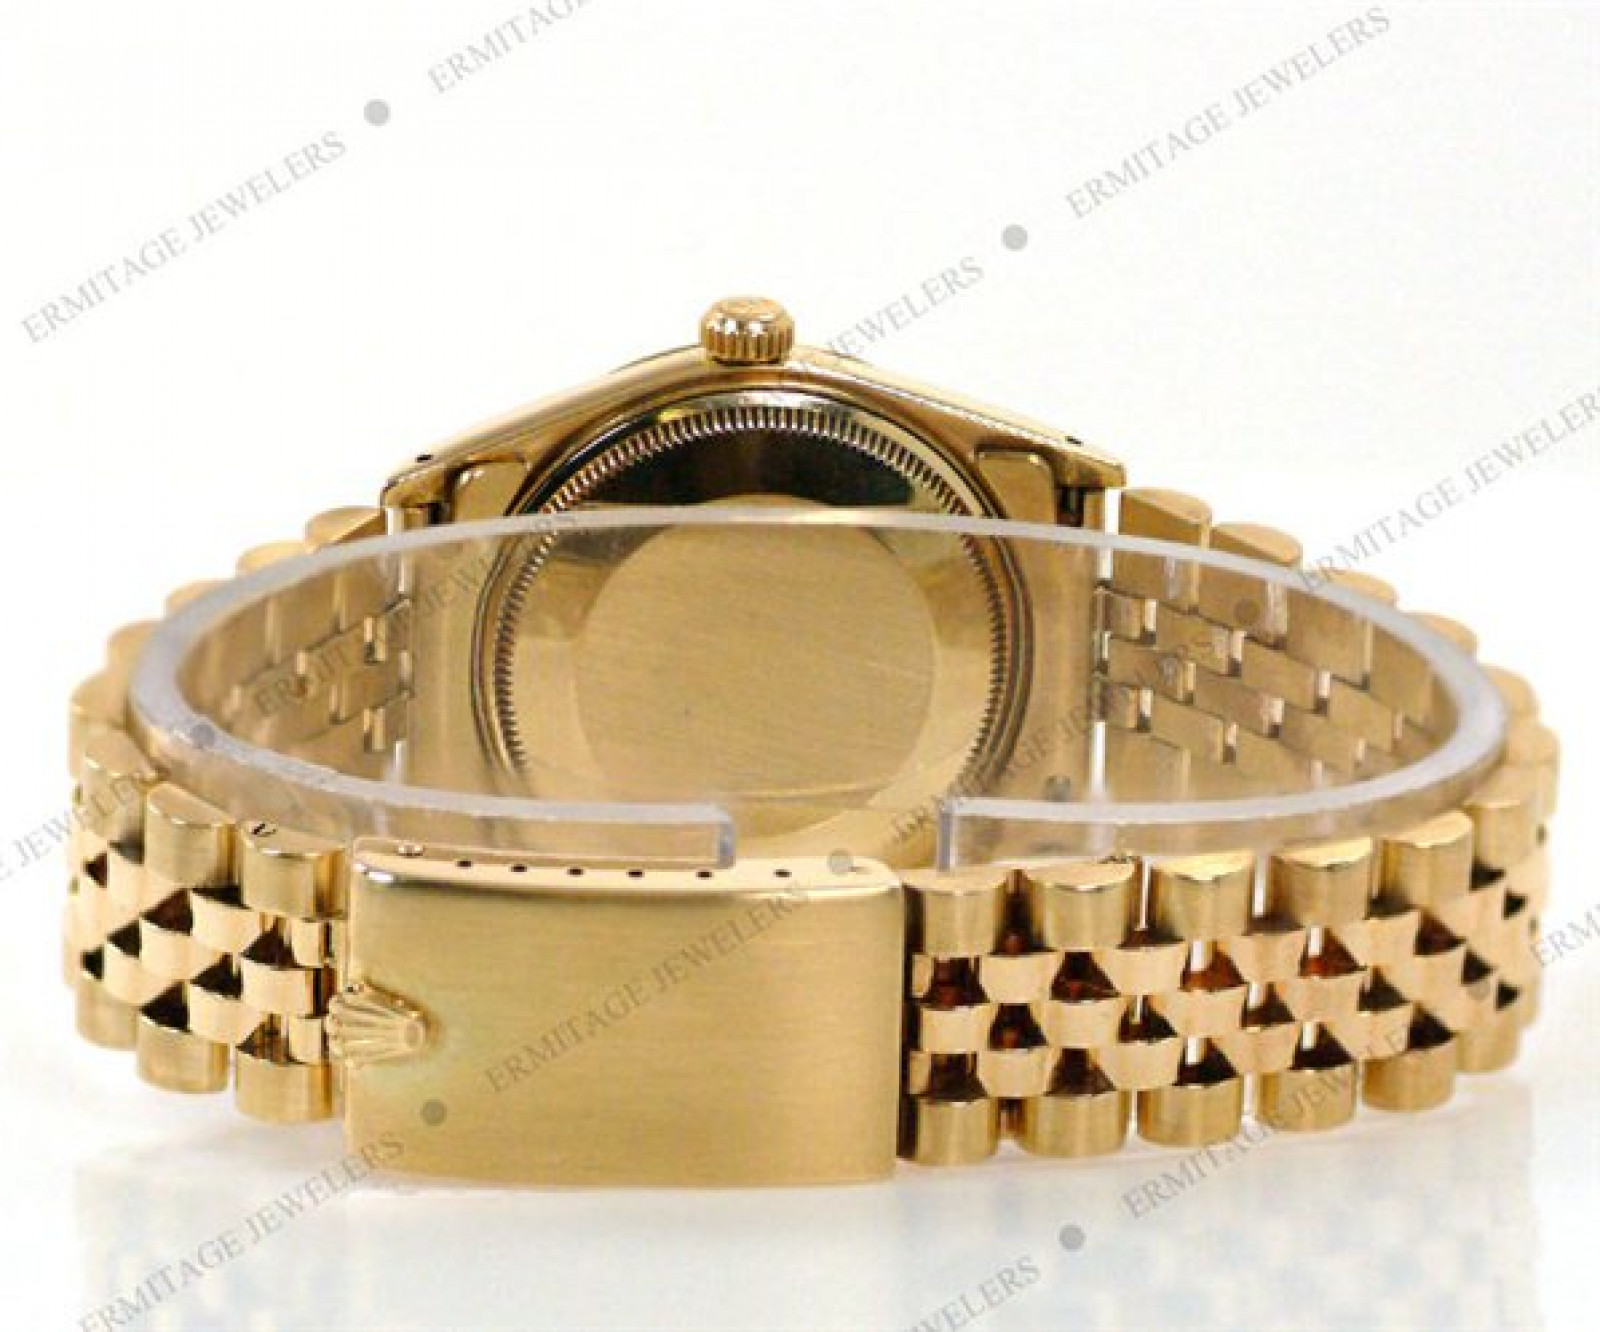 Gold Rolex Oyster Perpetual Date 15037